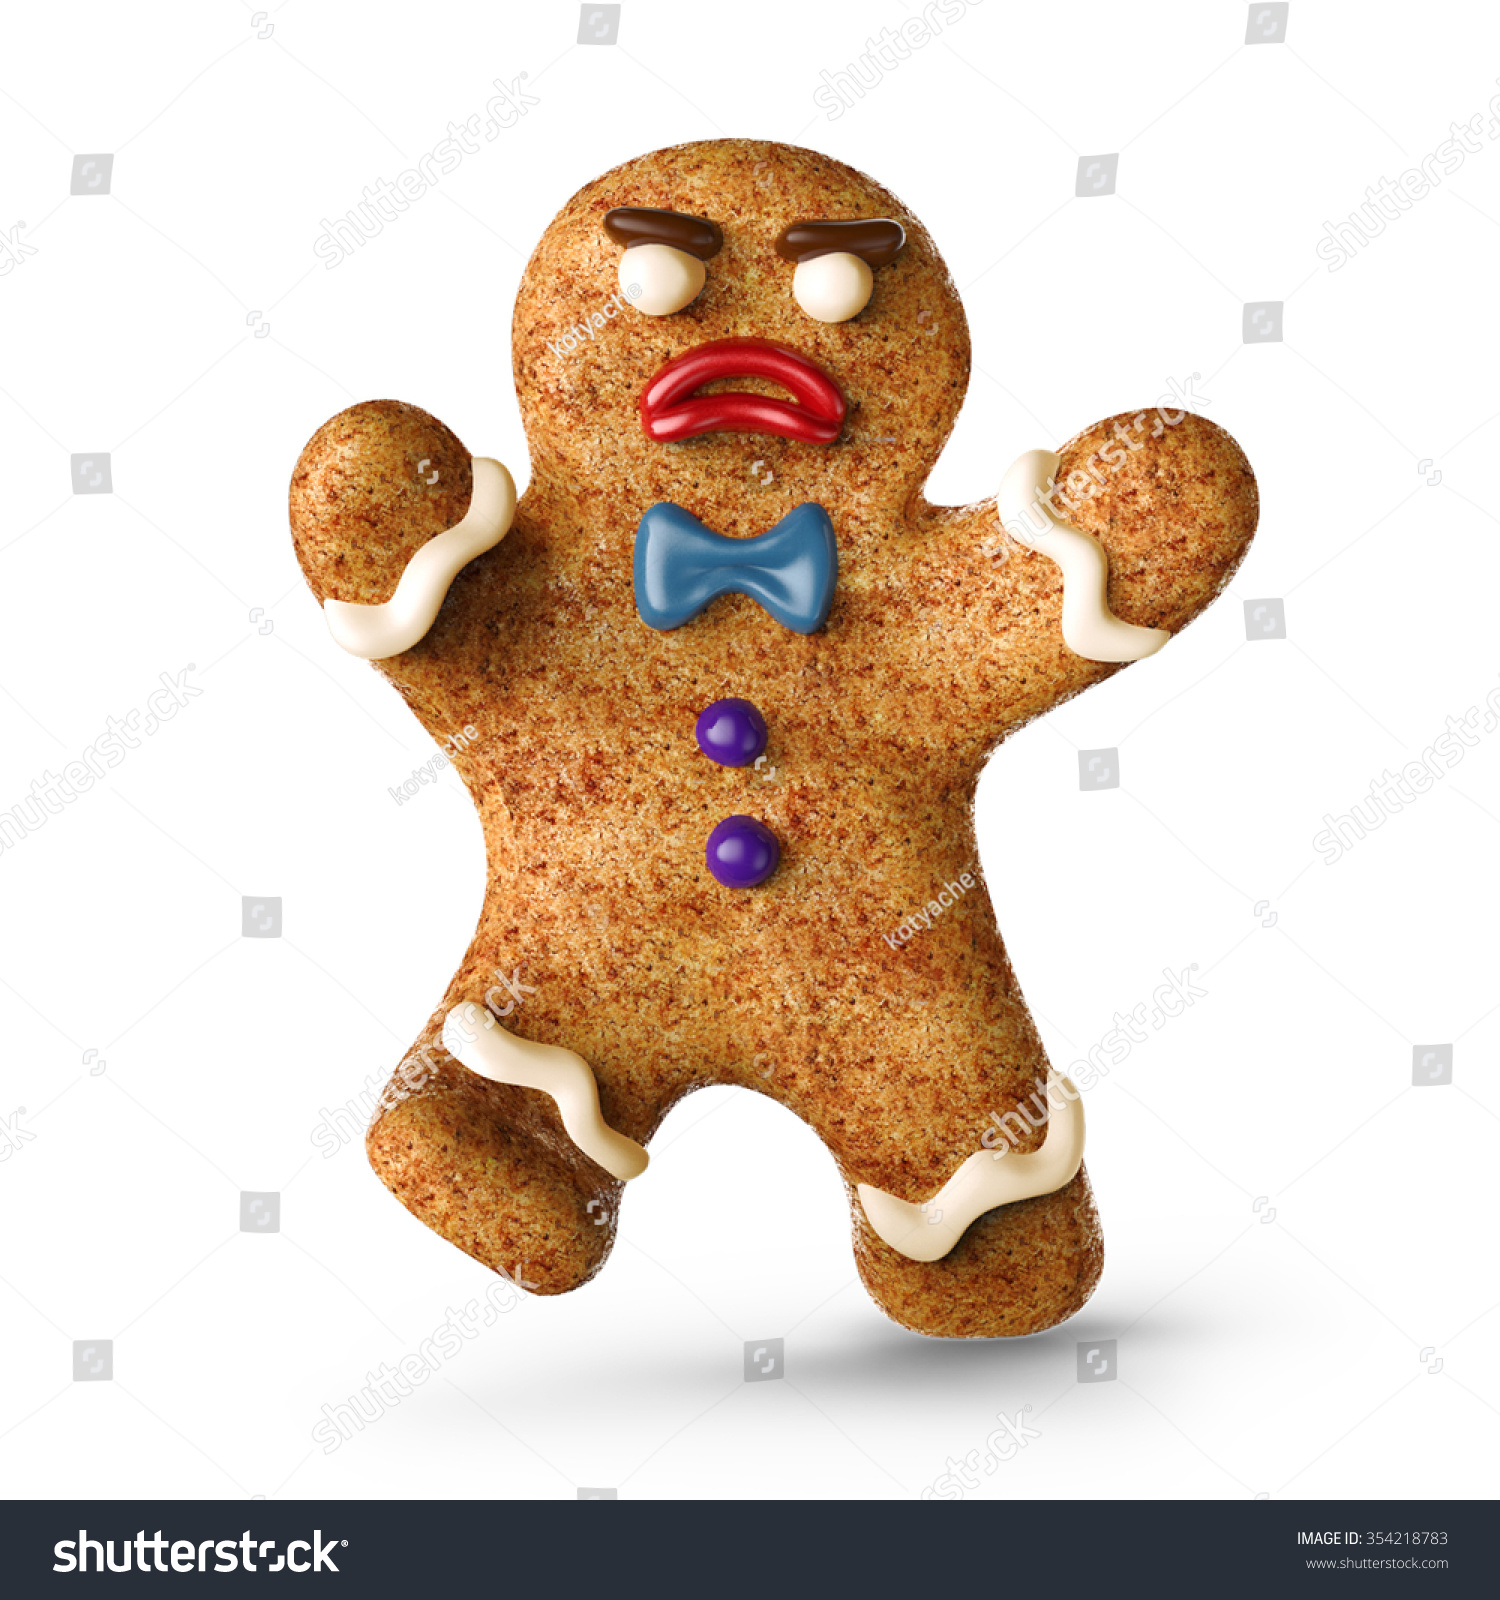 stock-photo-angry-attacking-gingerbread-